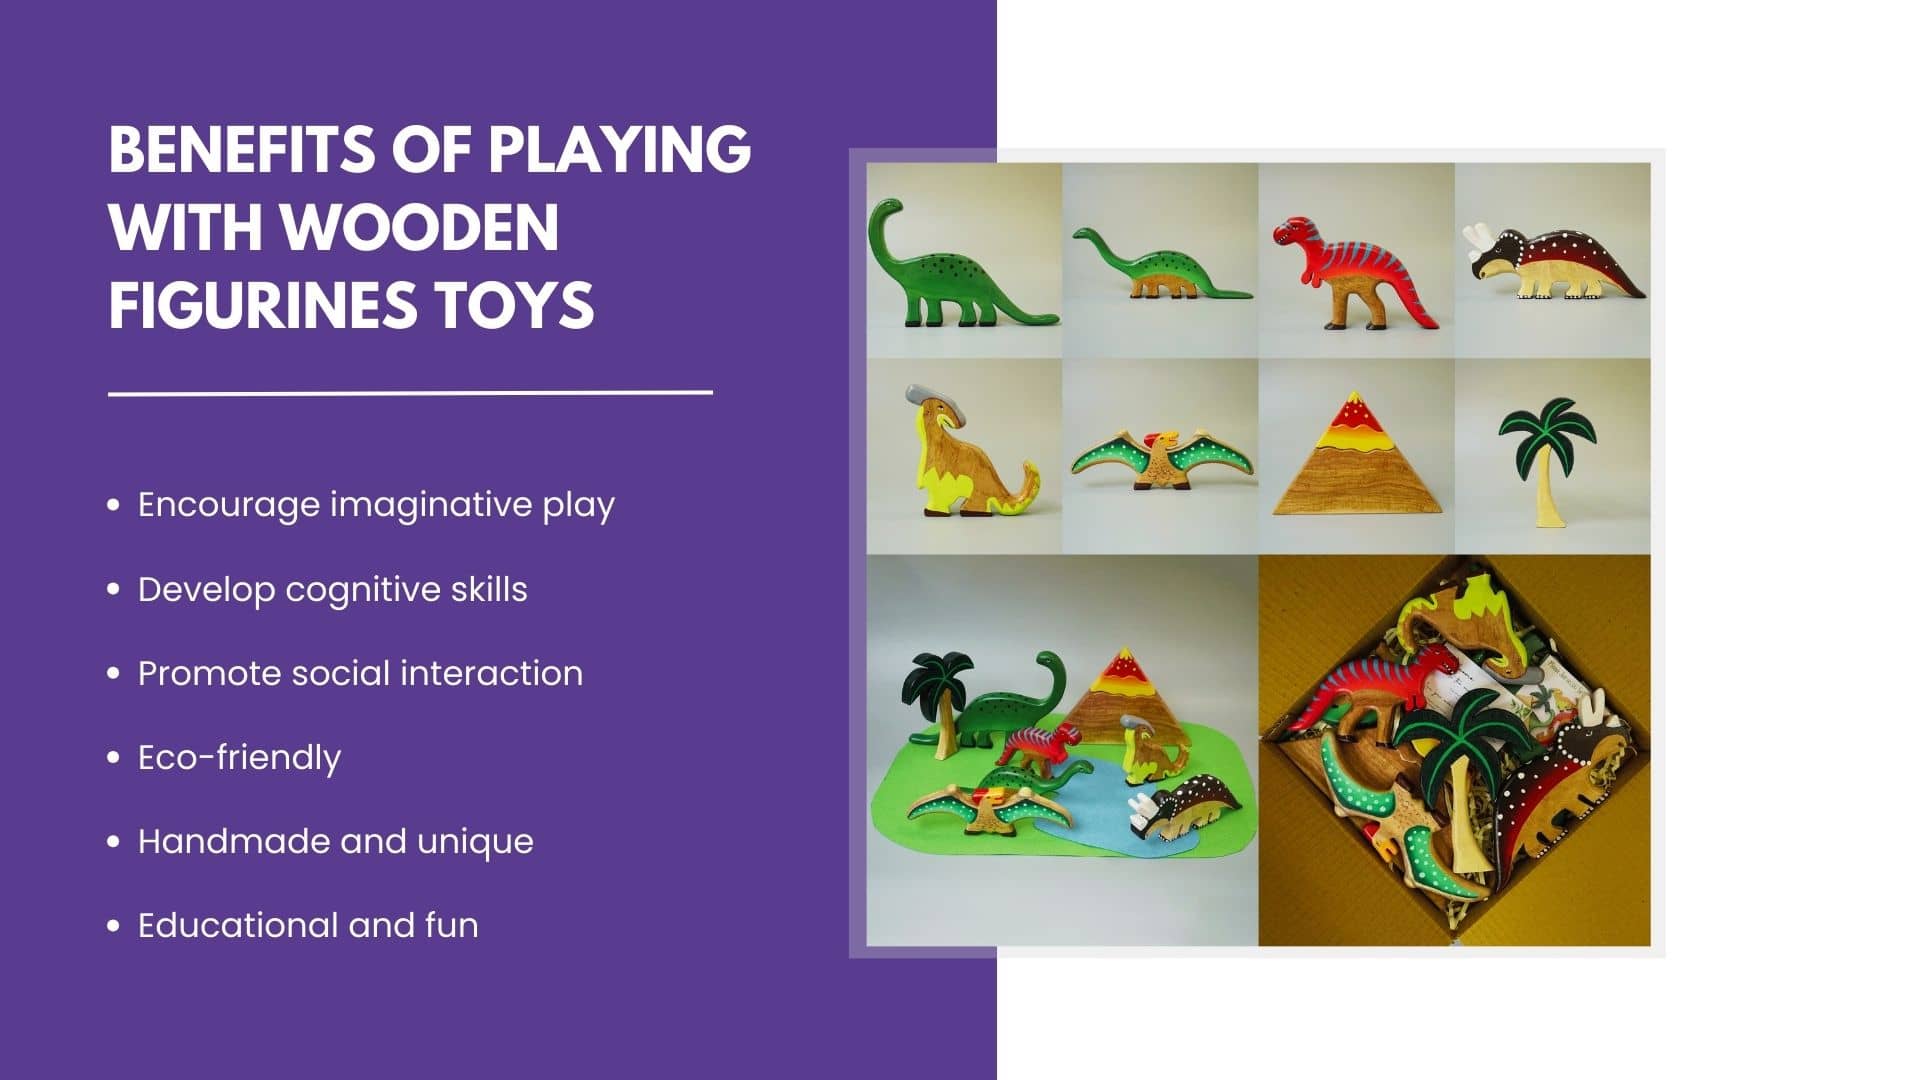 Benefits of Playing with Wooden Figurines Toys